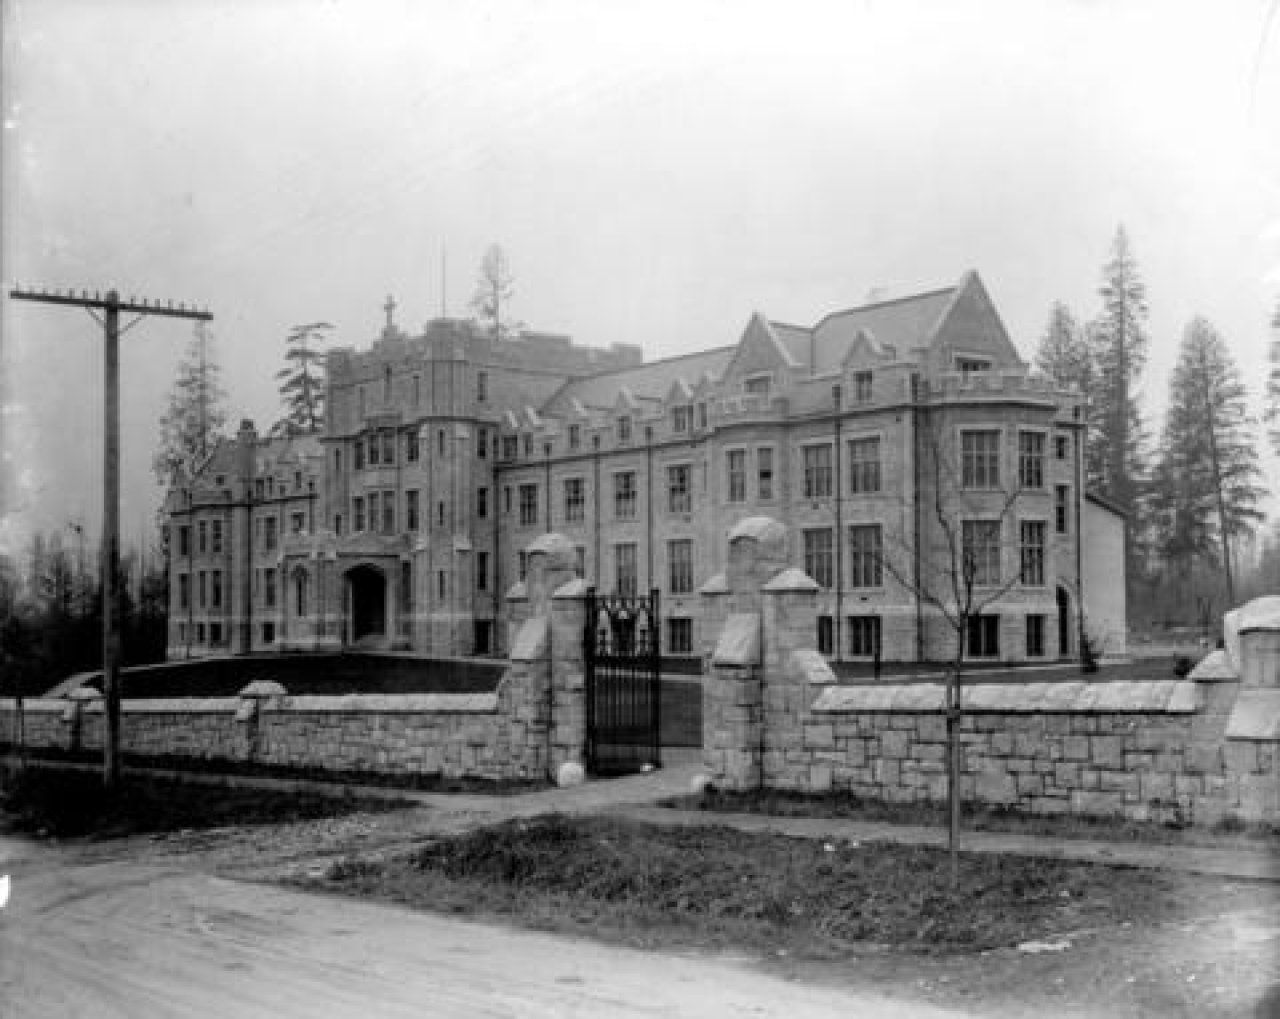 Convent of the Sacred Heart 1925
Source: City of Vancouver Archives Item : CVA 805-277 - [Convent of the Sacred Heart, Marine Heights, Point Grey, B.C. later St. George's School]